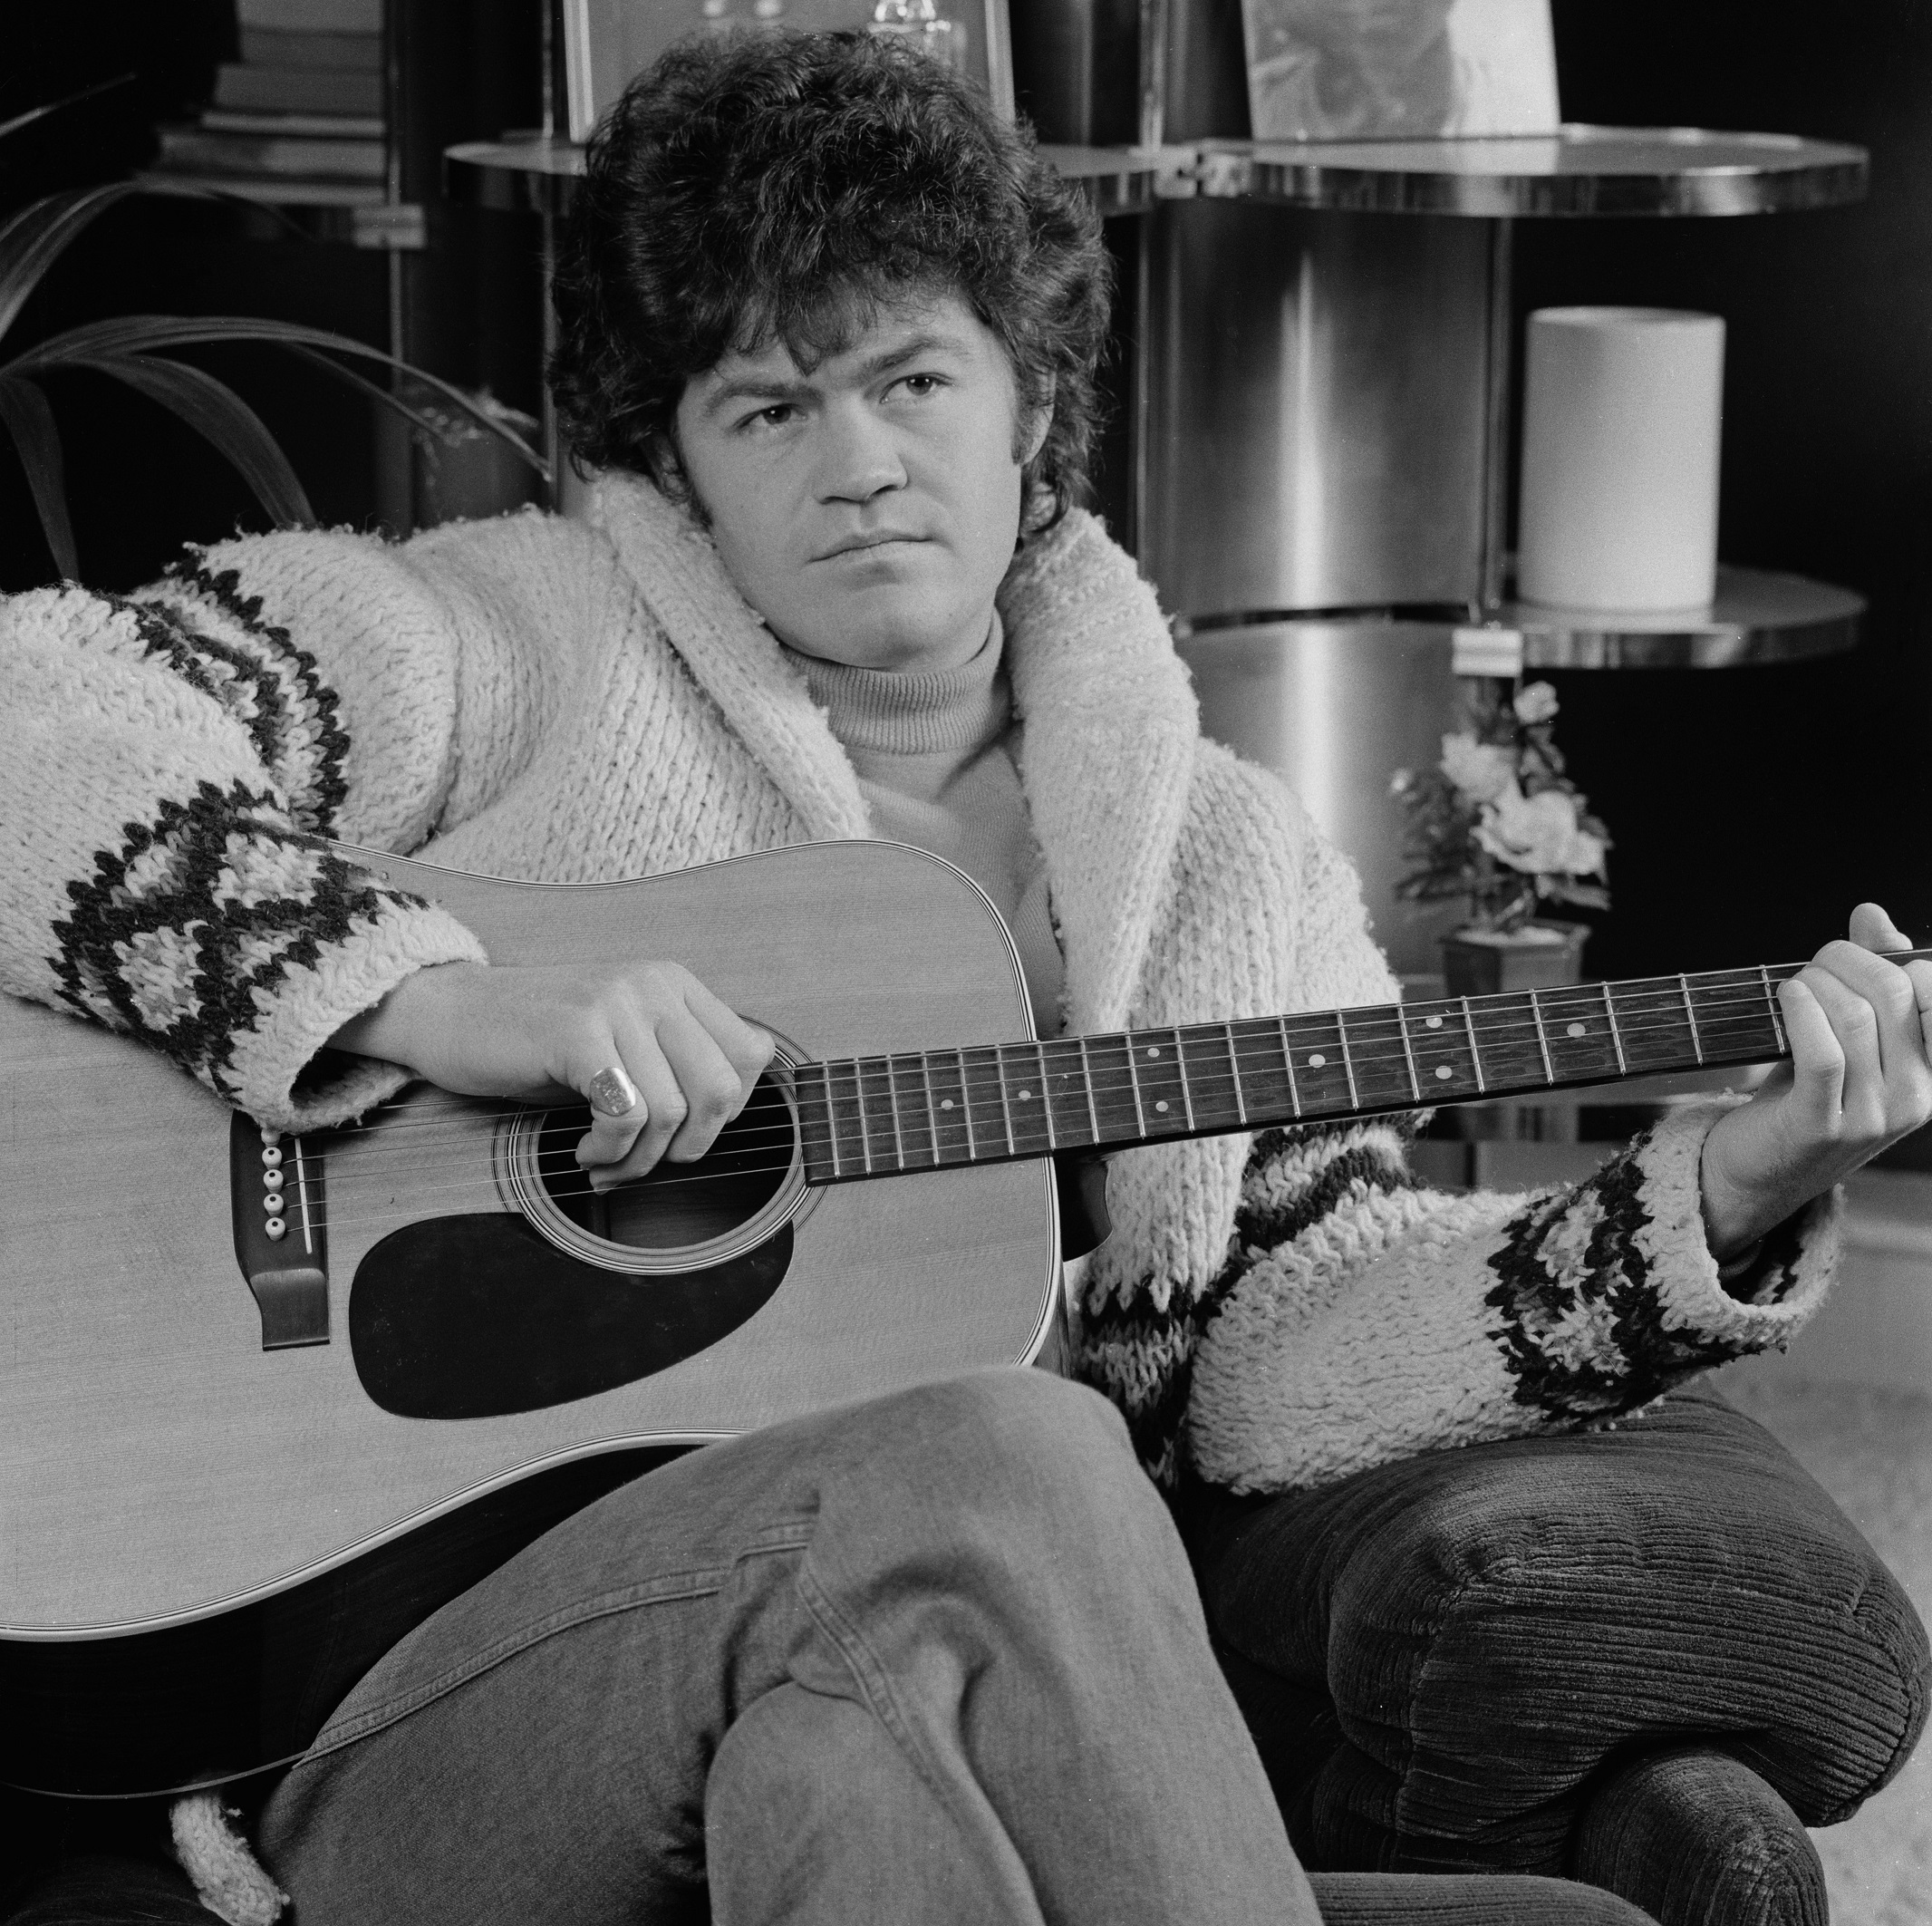 Micky Dolenz of The Monkees with a guitar